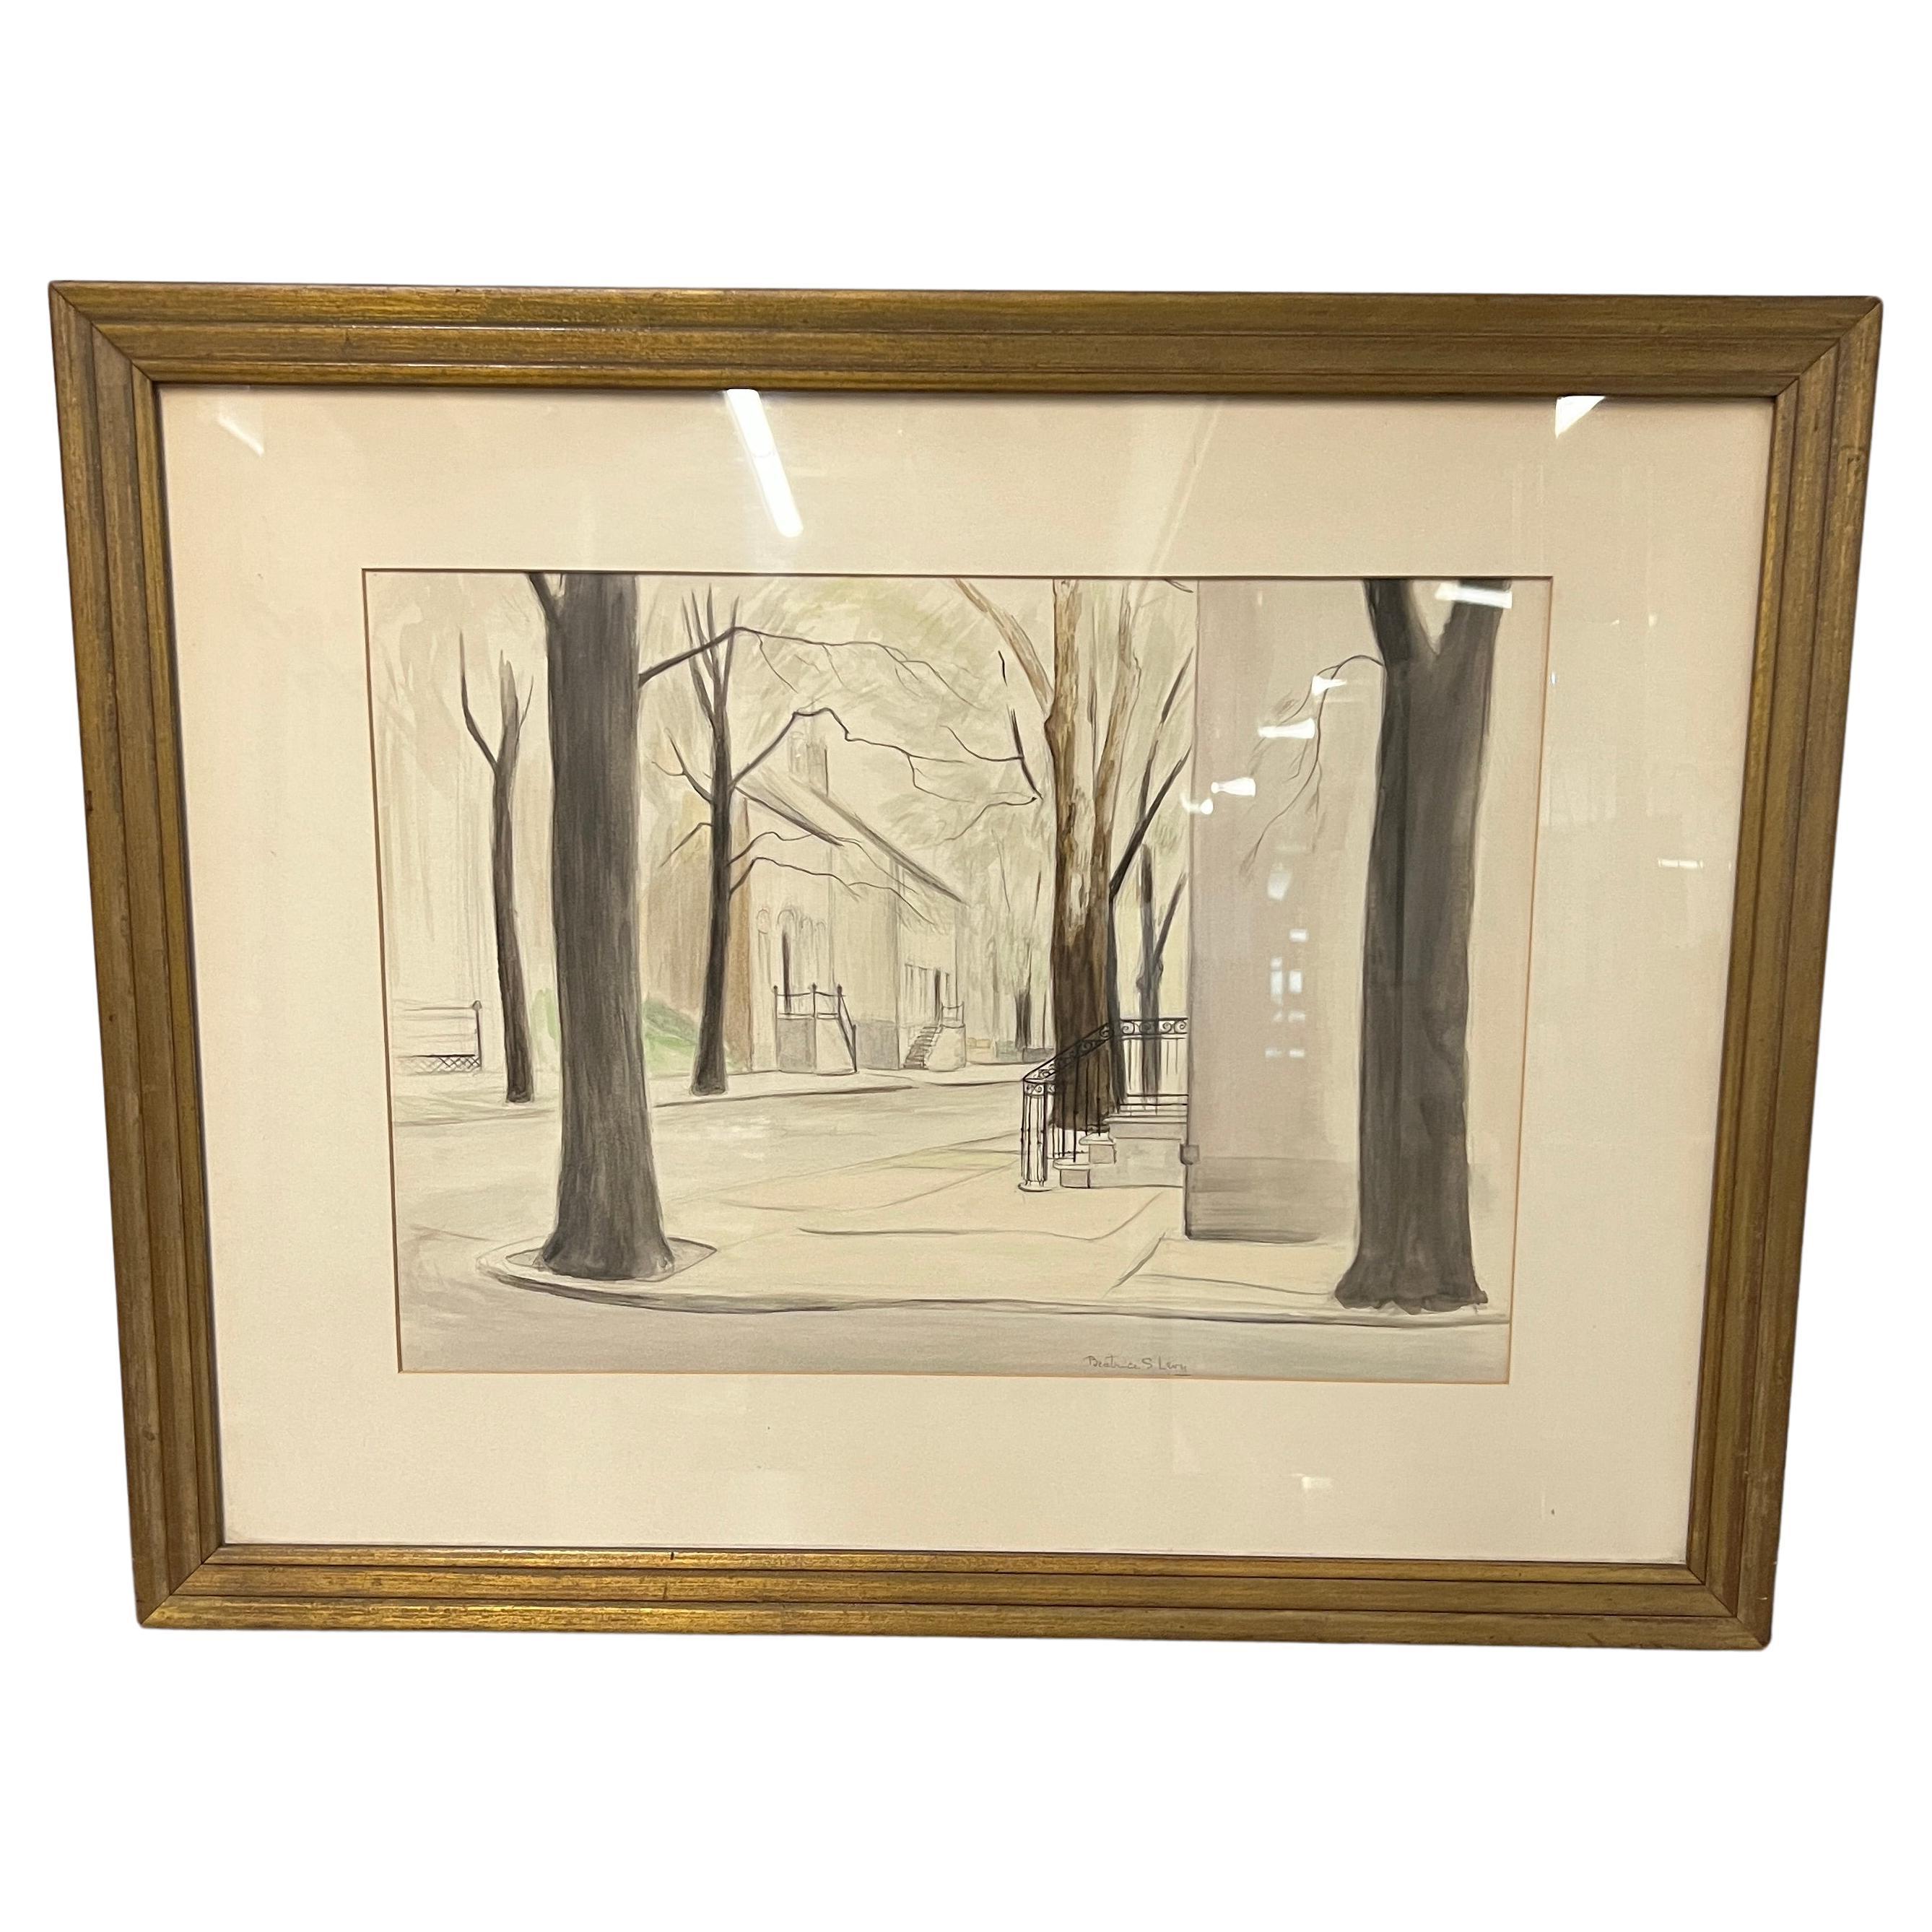 Framed Watercolor Titled "Quiet Street Corner" Madison, in by Beatrice S. Levy